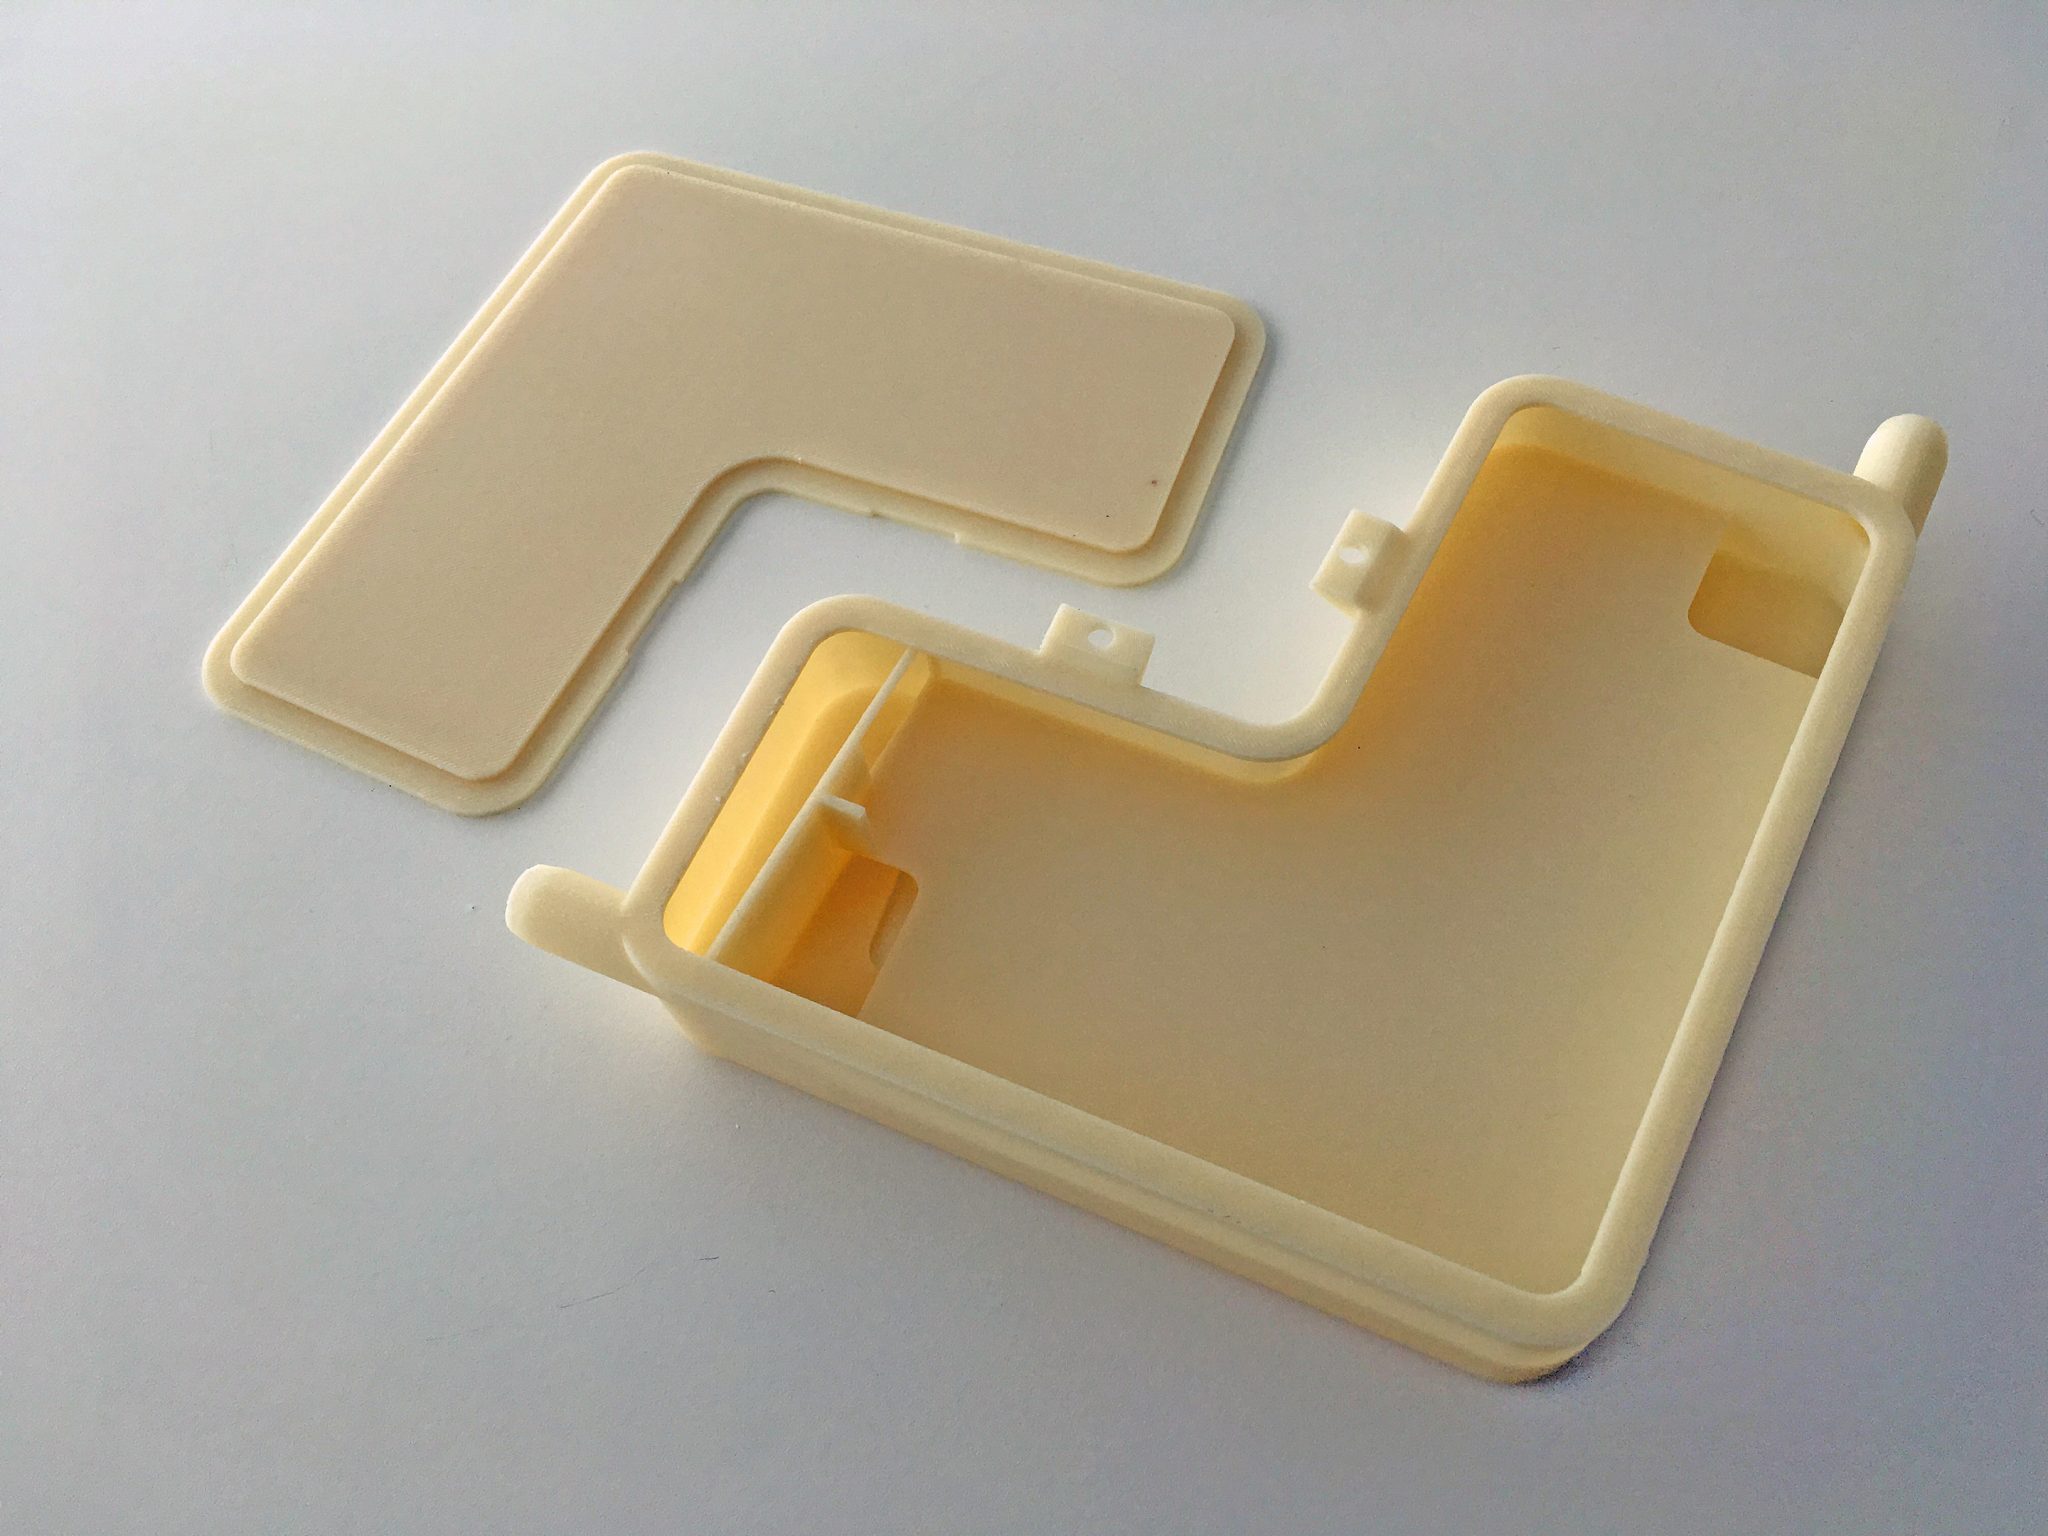 Part of the 3D printed boiler for Zoppas, produced in ULTEM 1010 resin. Photo via Stratasys.